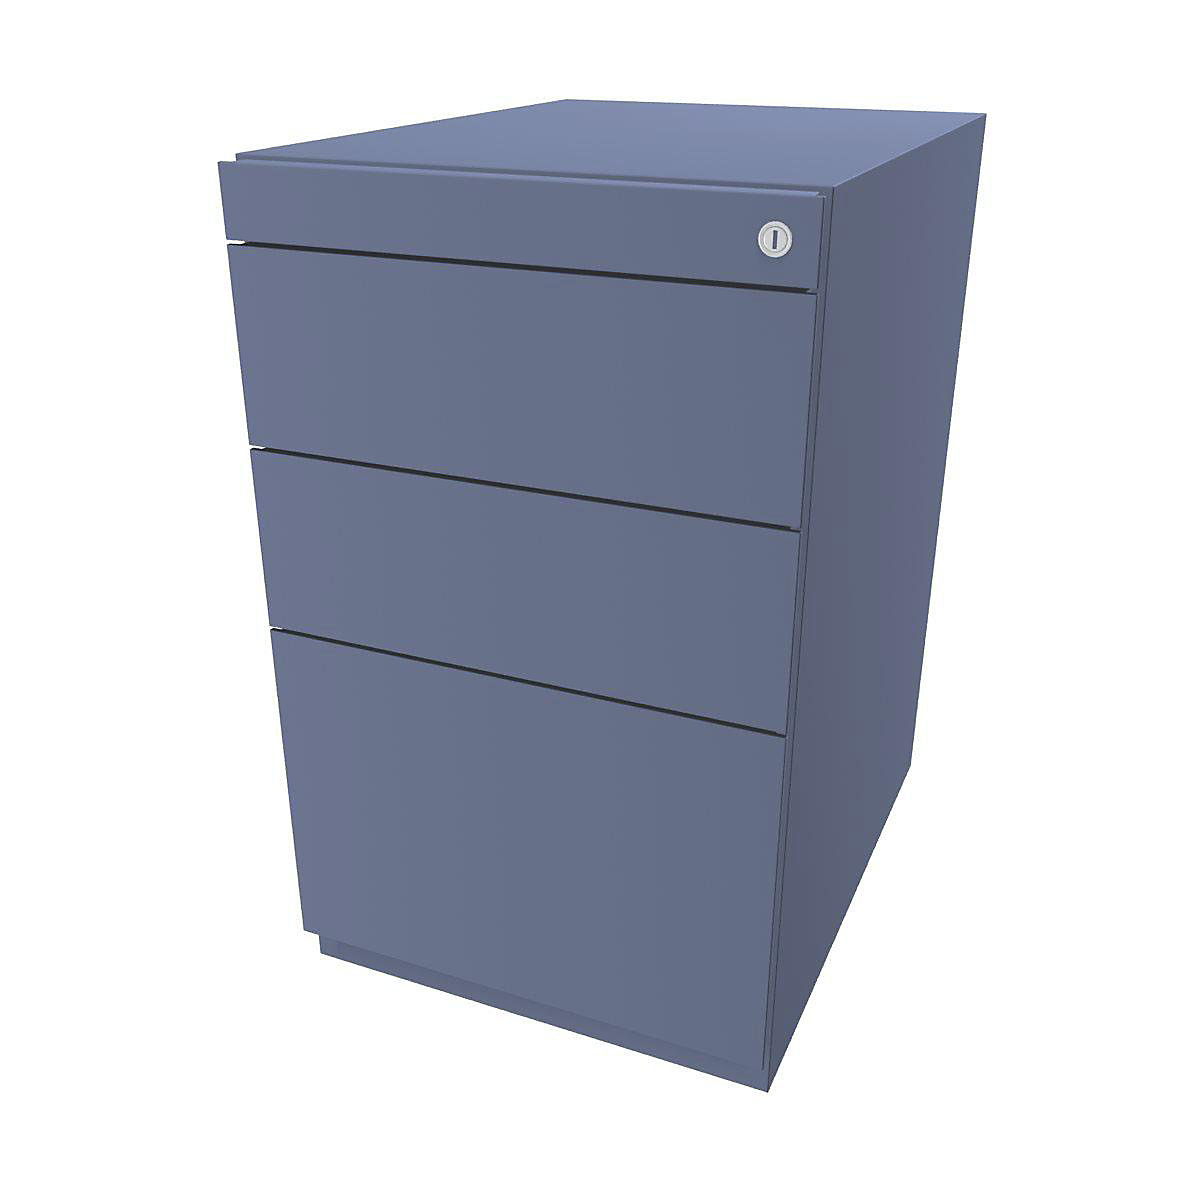 Note™ fixed pedestal, with 2 universal drawers, 1 suspension file drawer – BISLEY, without top, depth 565 mm, blue-10